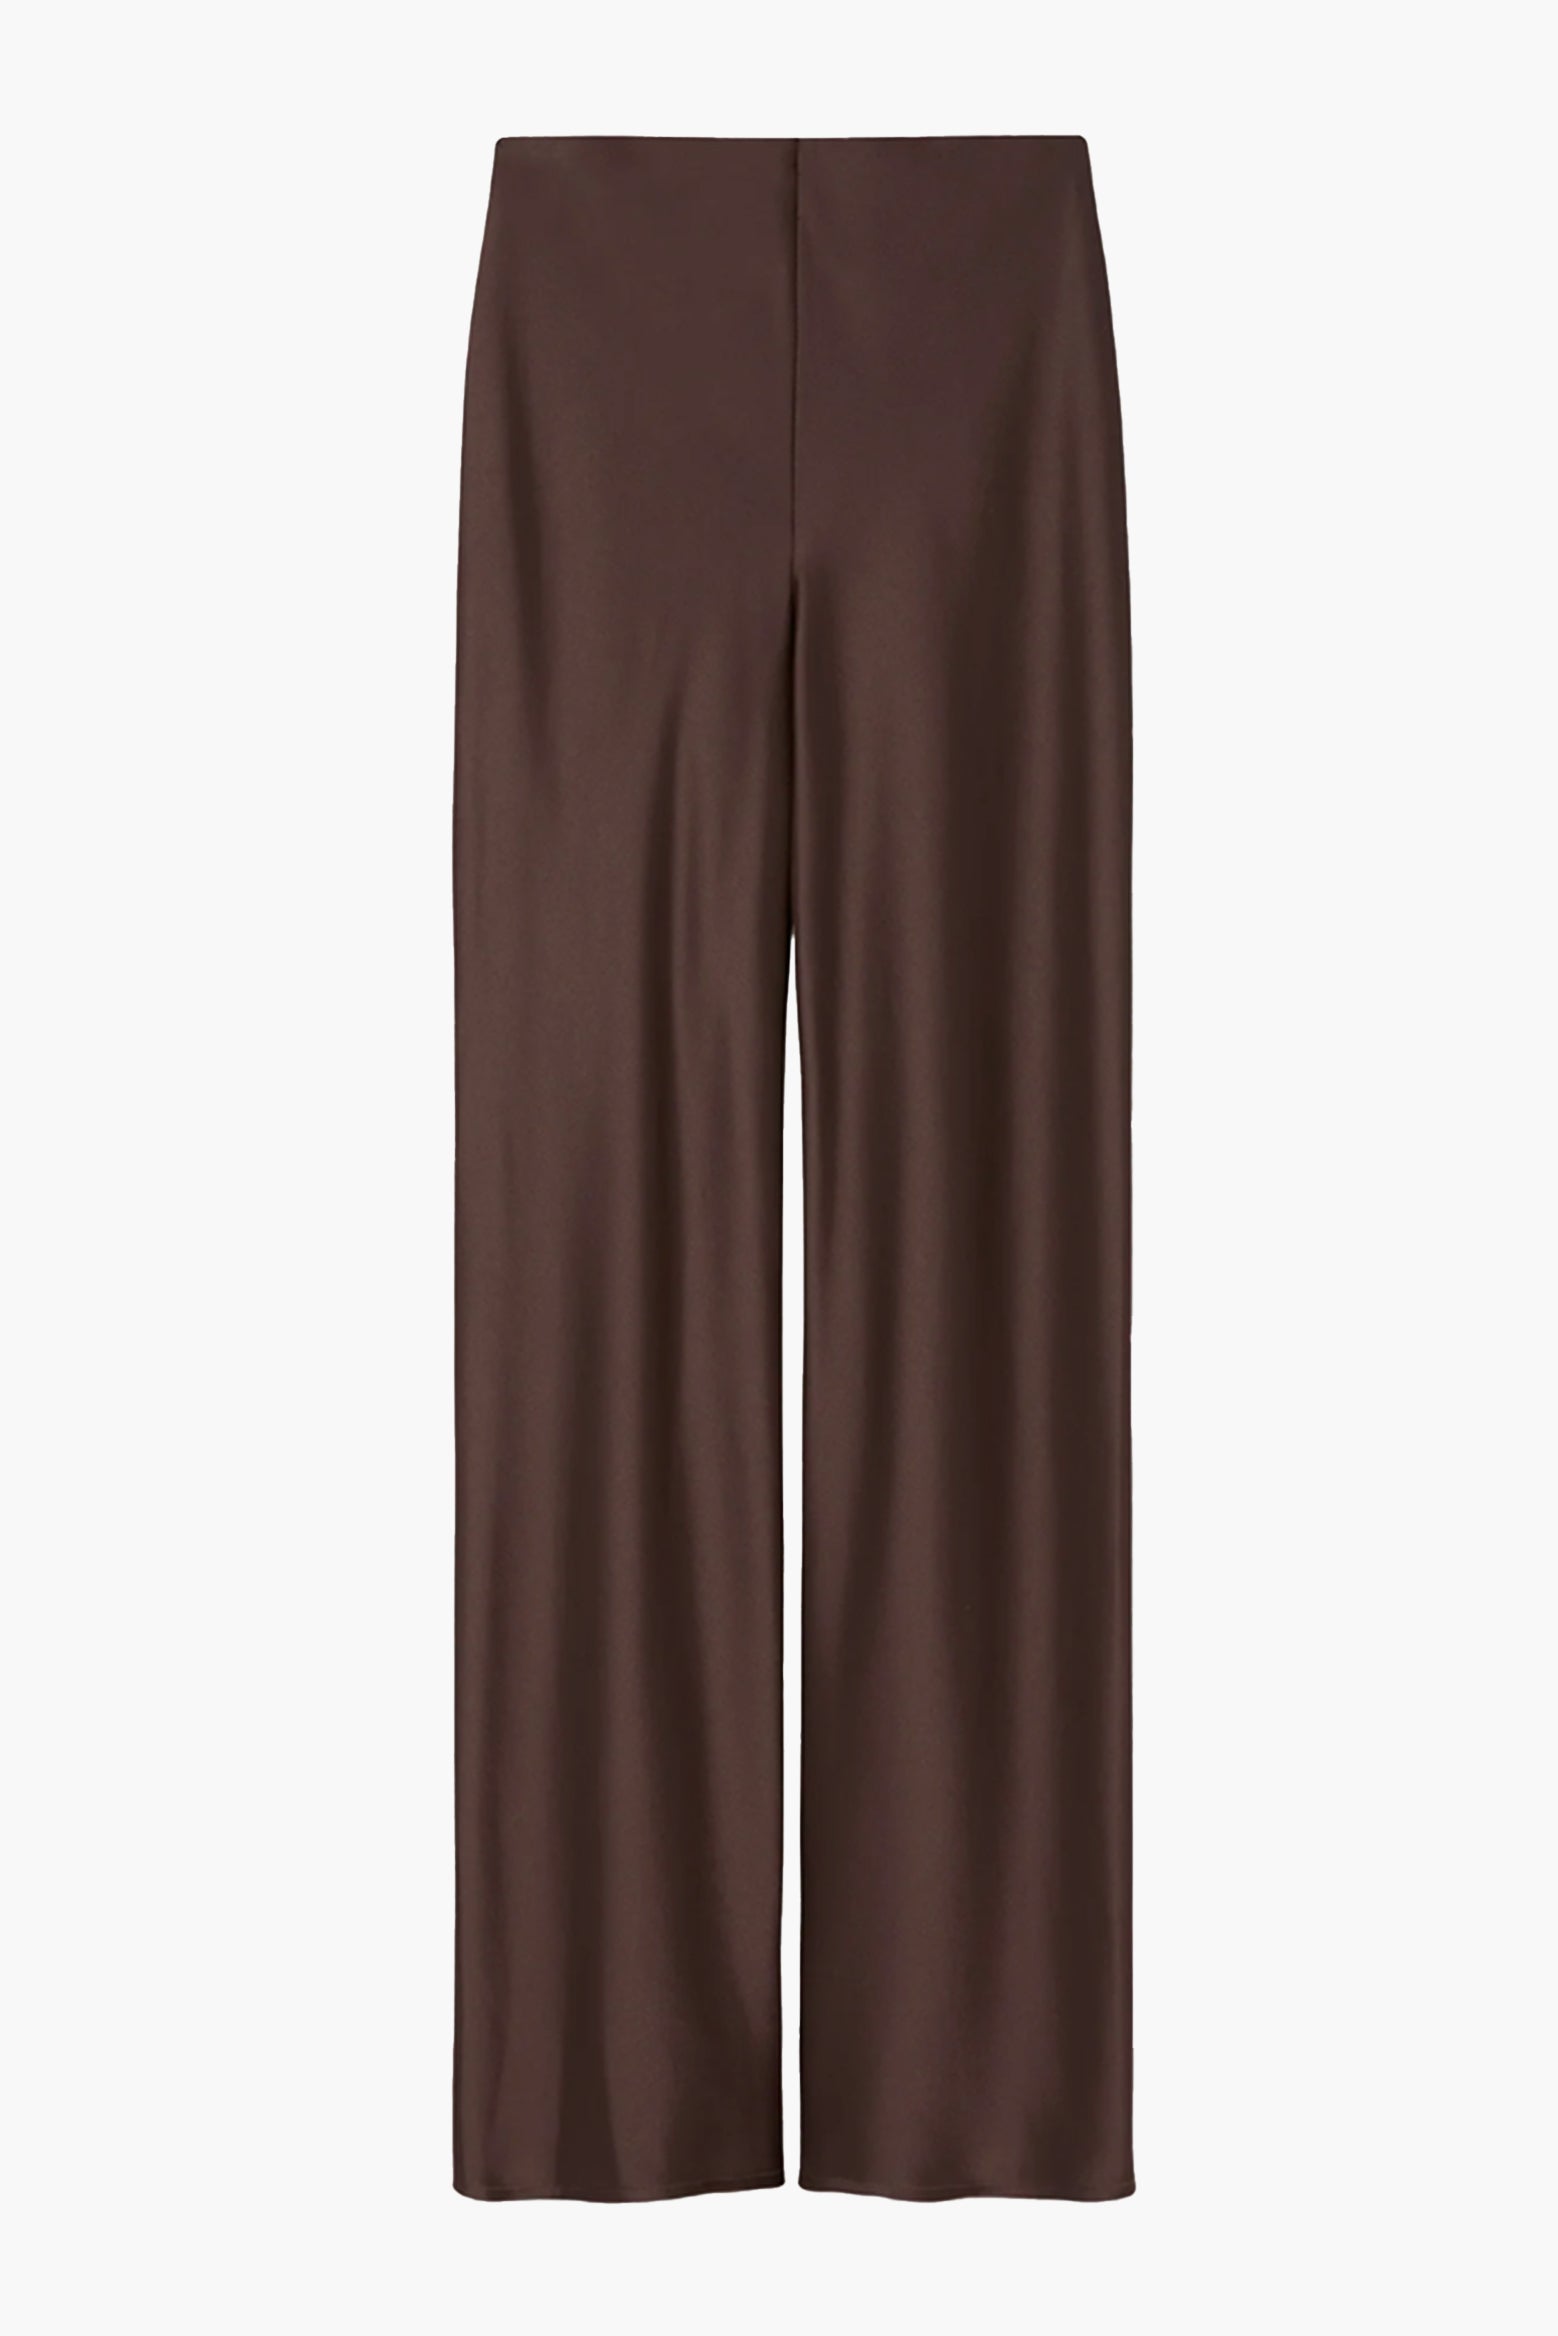 A.EMERY Myrna Pant in Chocolate | The New Trend Australia